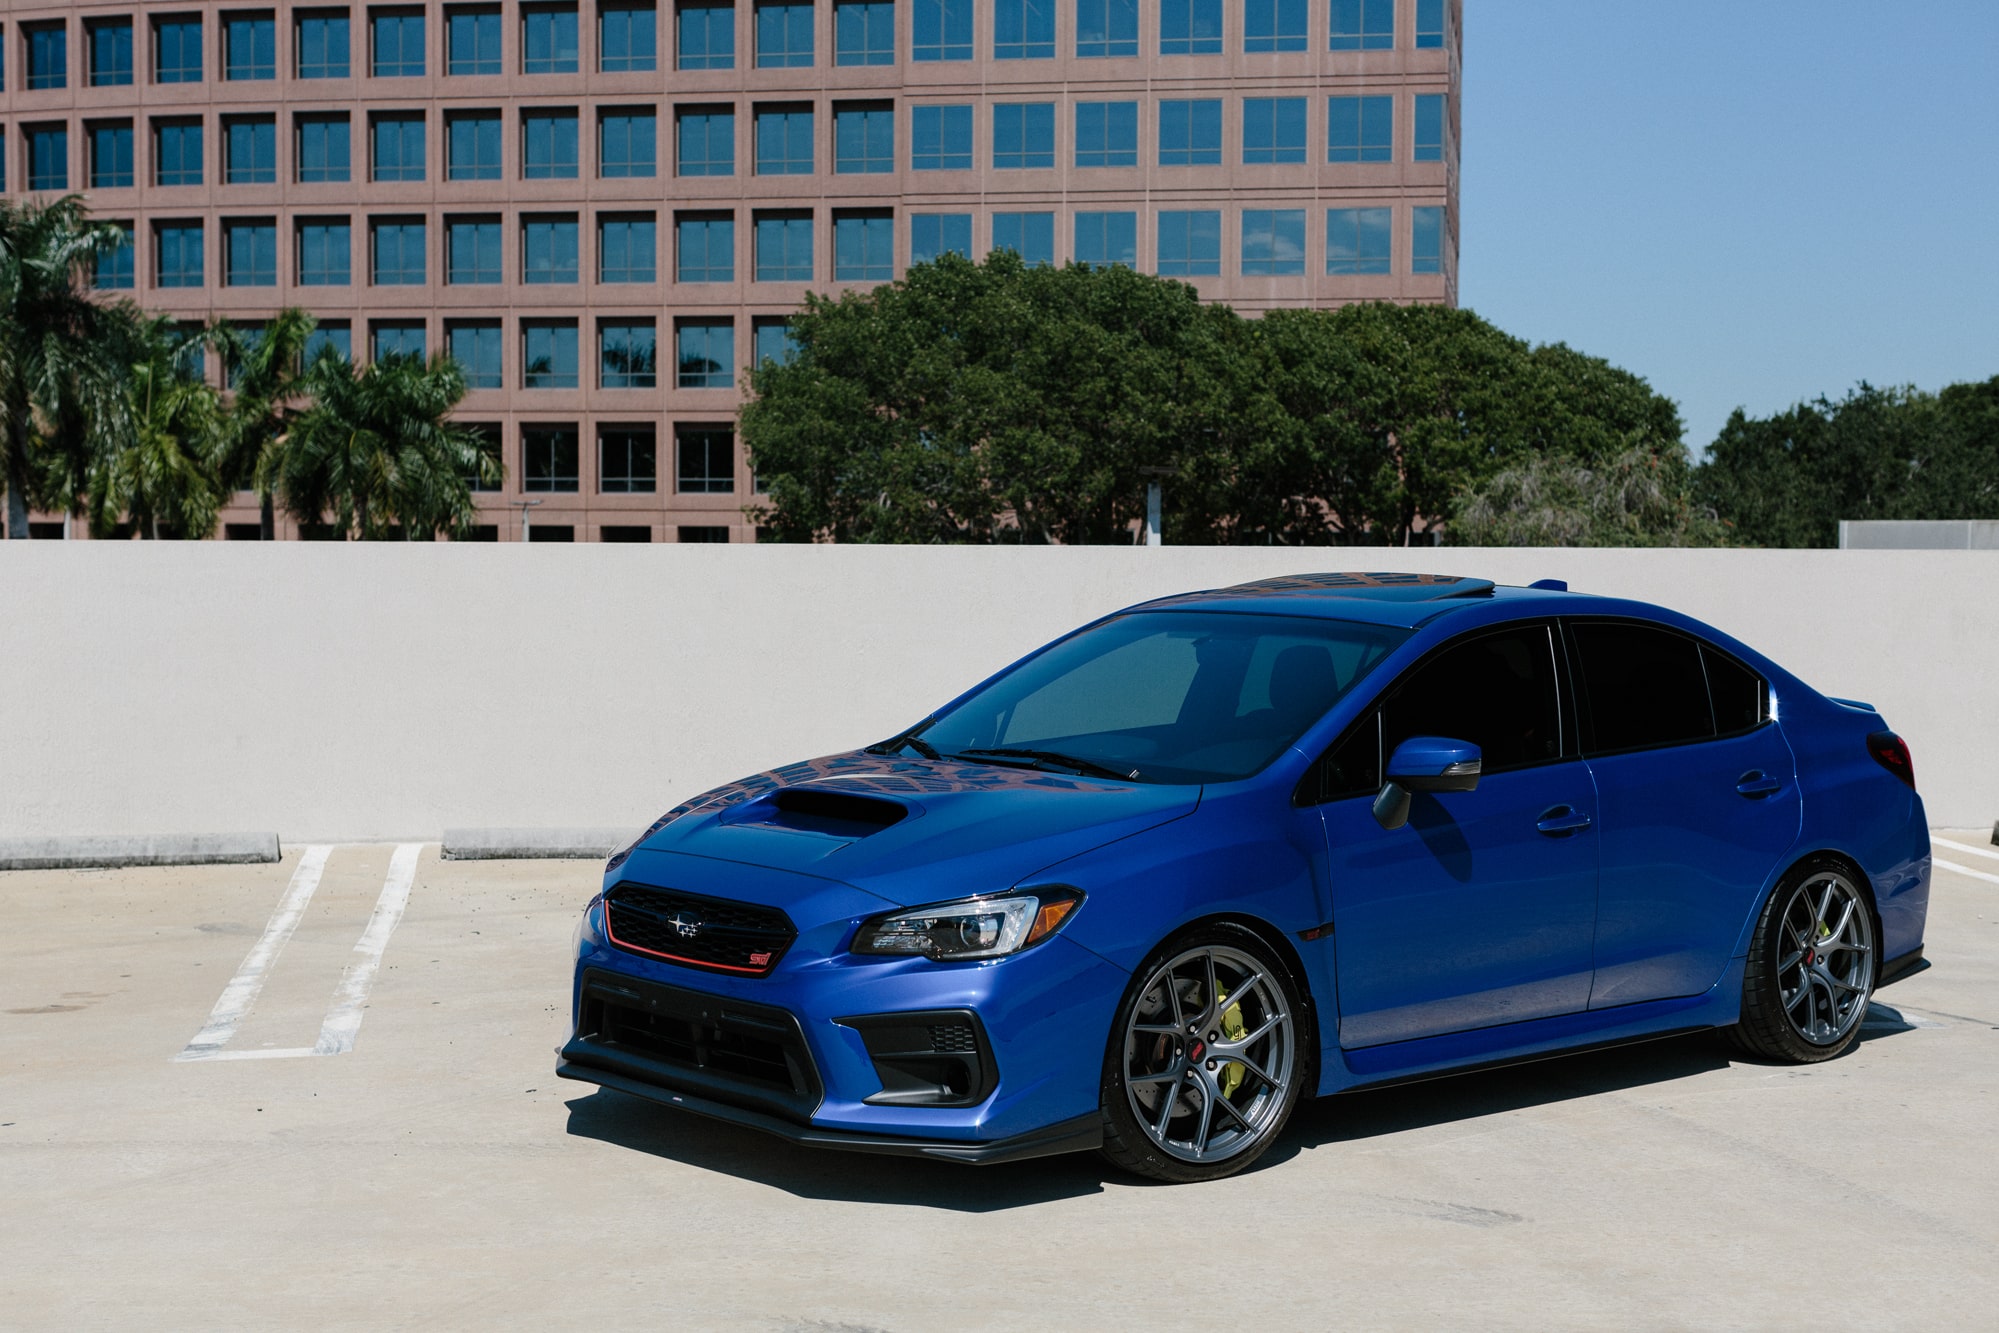 2020 Subaru WRX STi Limited (VA) | $30K in Upgrades! | Cobb | Tomei | Beat Rush | Obsessively Maintained | All Modifications in the Last 6 Months | Super Low Mileage!